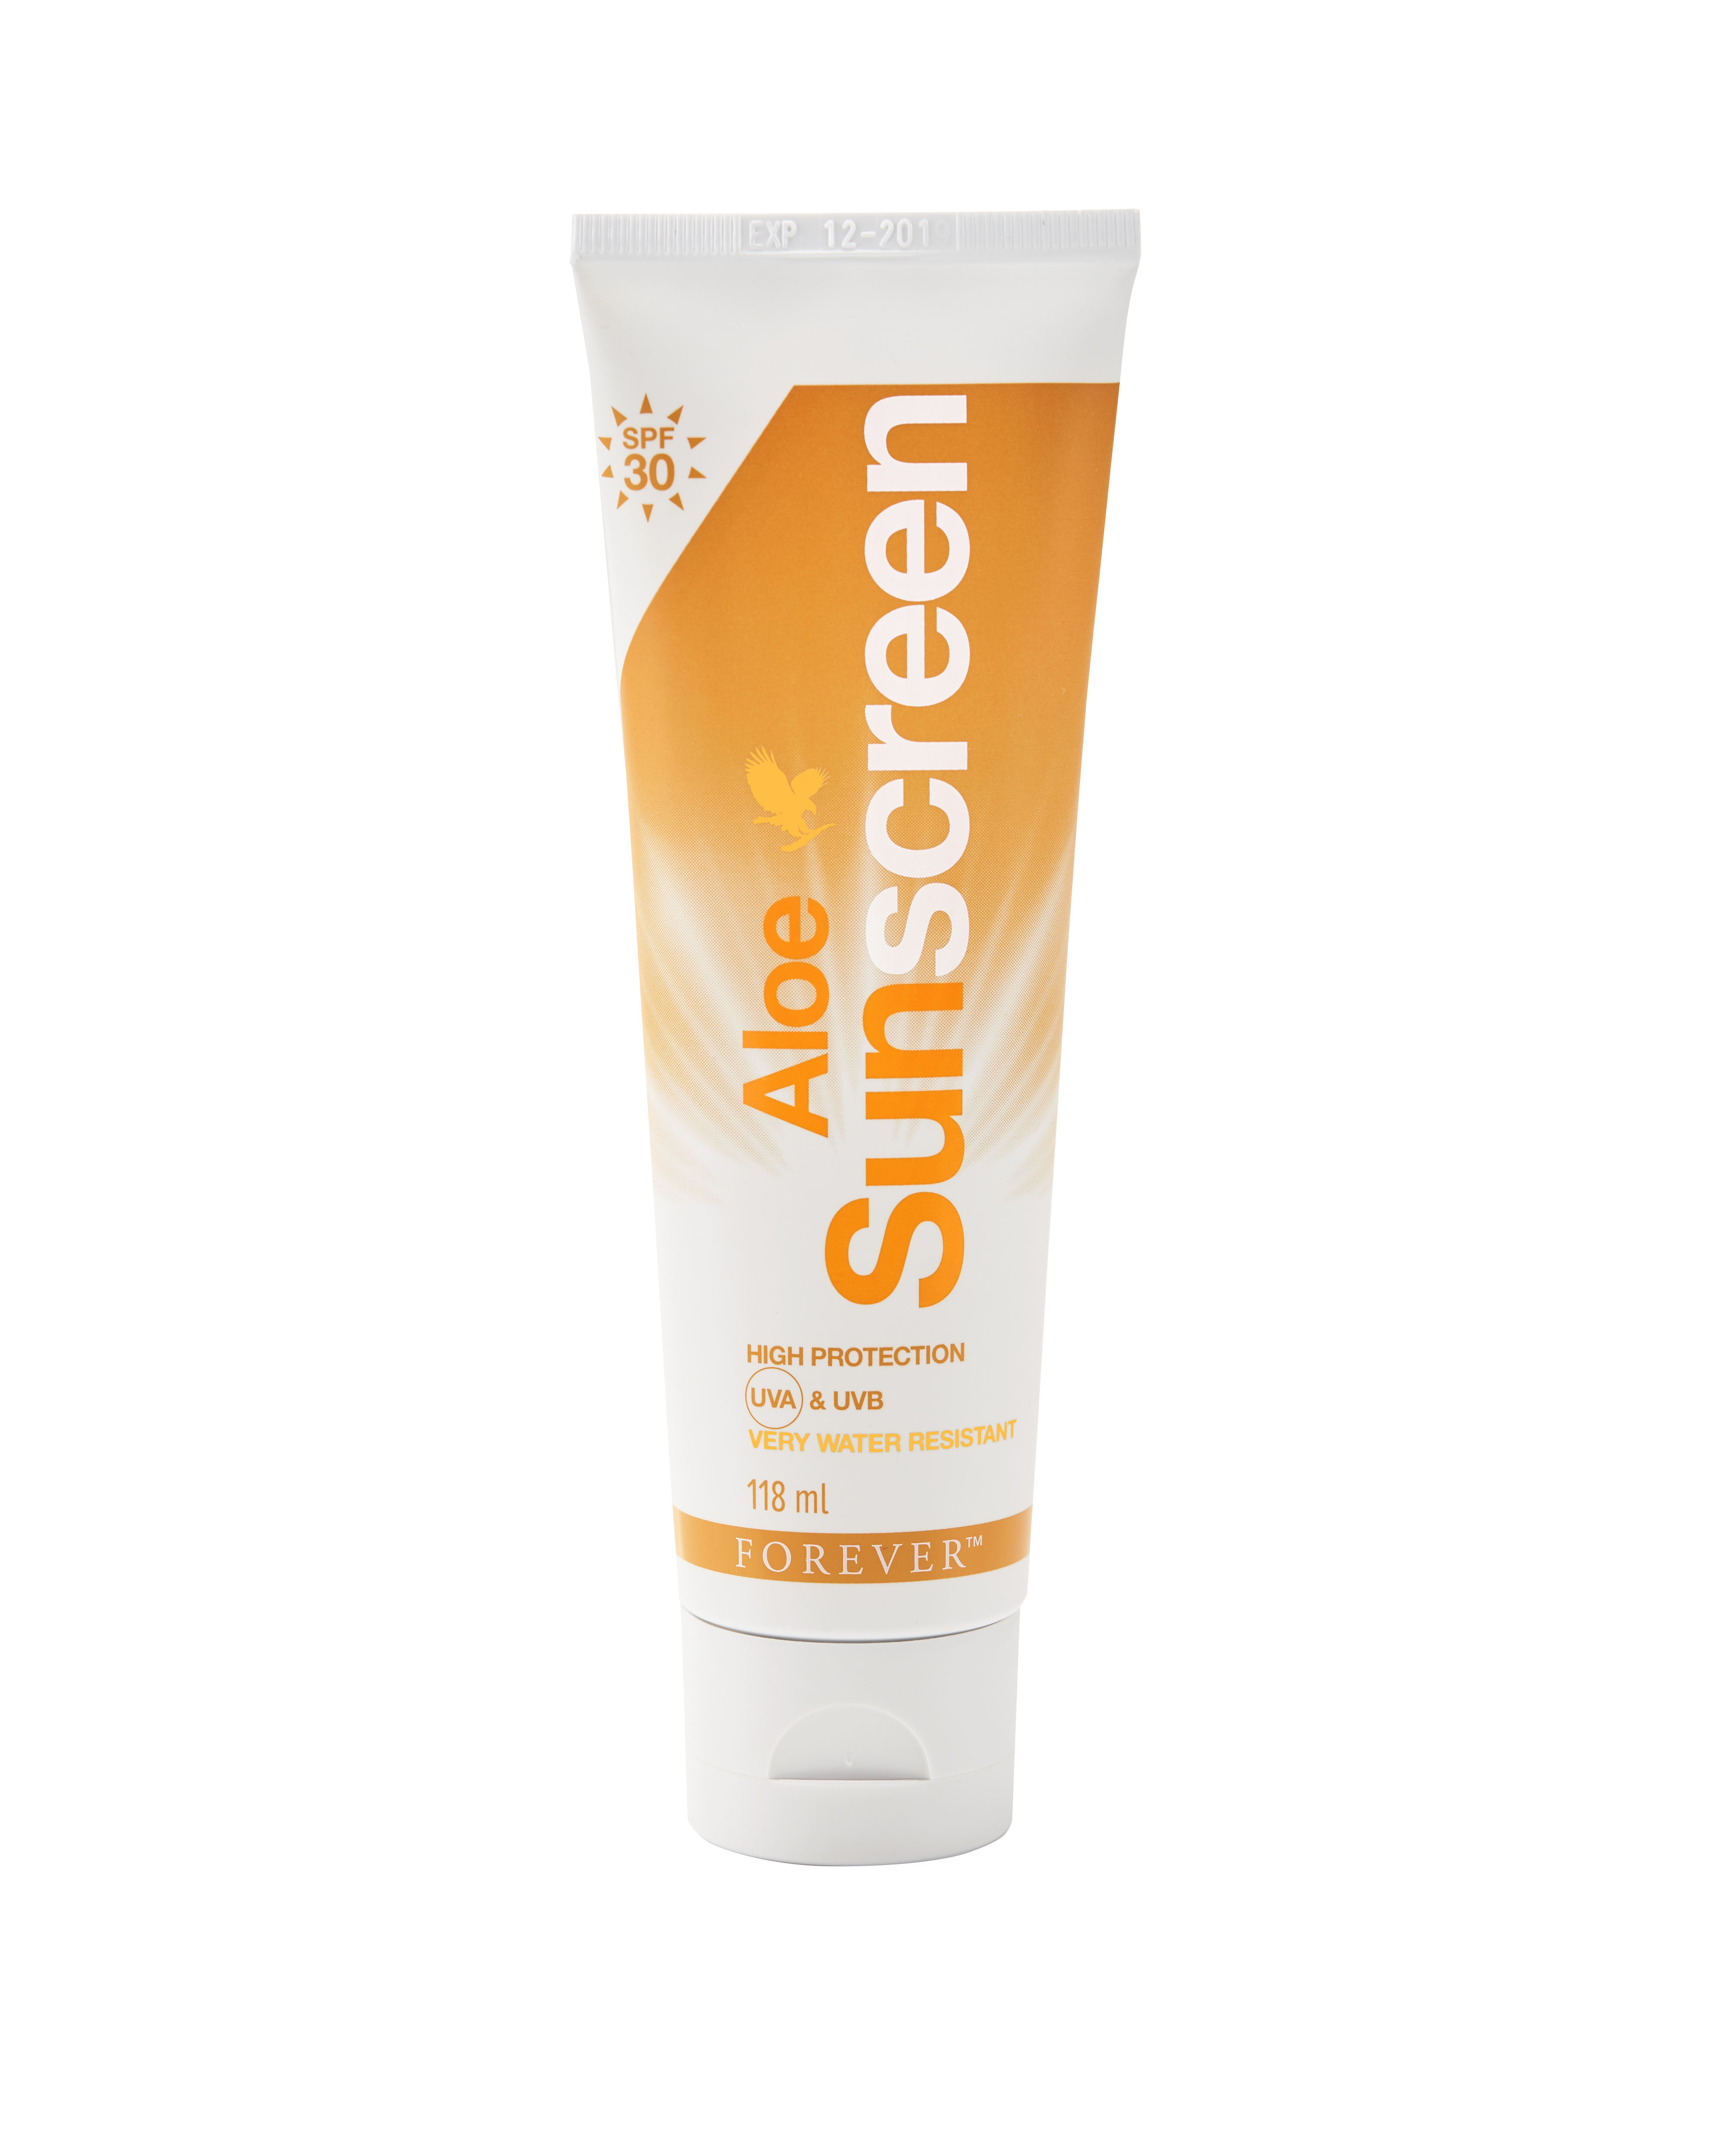 Aloe Sunscreen lets you soak in the sun without harmful rays wreaking havoc on your skin. This water-resistant formula offers SPF 30 broad spectrum protection against UVA and UVB rays while locking in moisture with soothing inner leaf aloe. Powerful and gentle, Aloe Sunscreen will keep the whole family protected, wherever the adventure leads.​<br /><br /><b>'</b><b>Aloe Sunscreen</b><b>' was awarded the EXCELLENT rating in dermatological tests carried out by Dermatest®.</b>